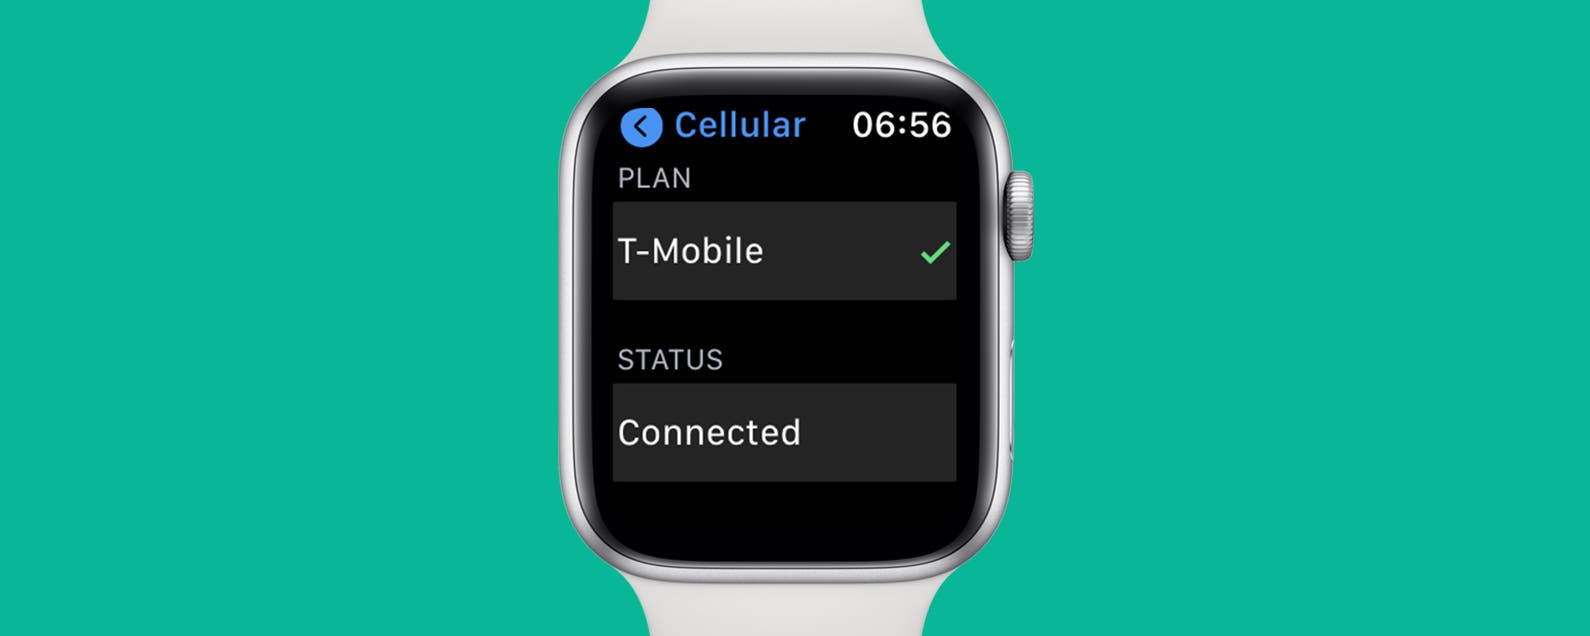 How Do You Find Your Apple Watch Phone Number?